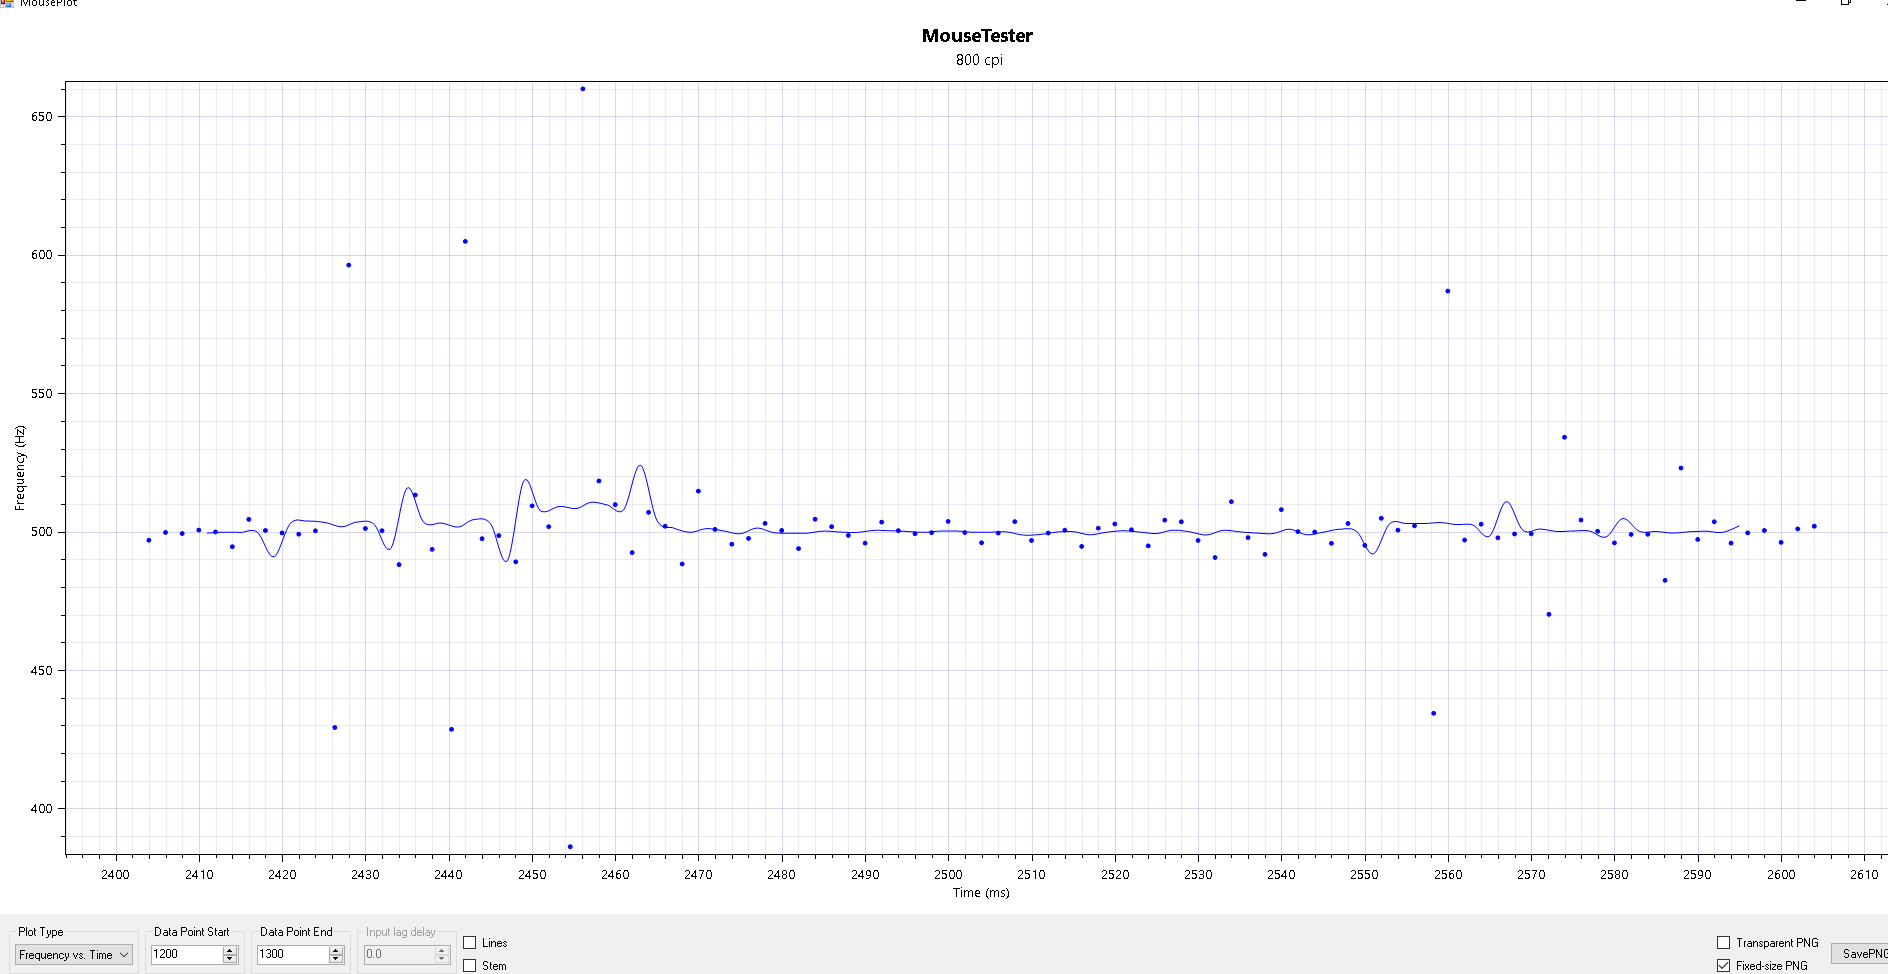 mousetester frequency vs time.png